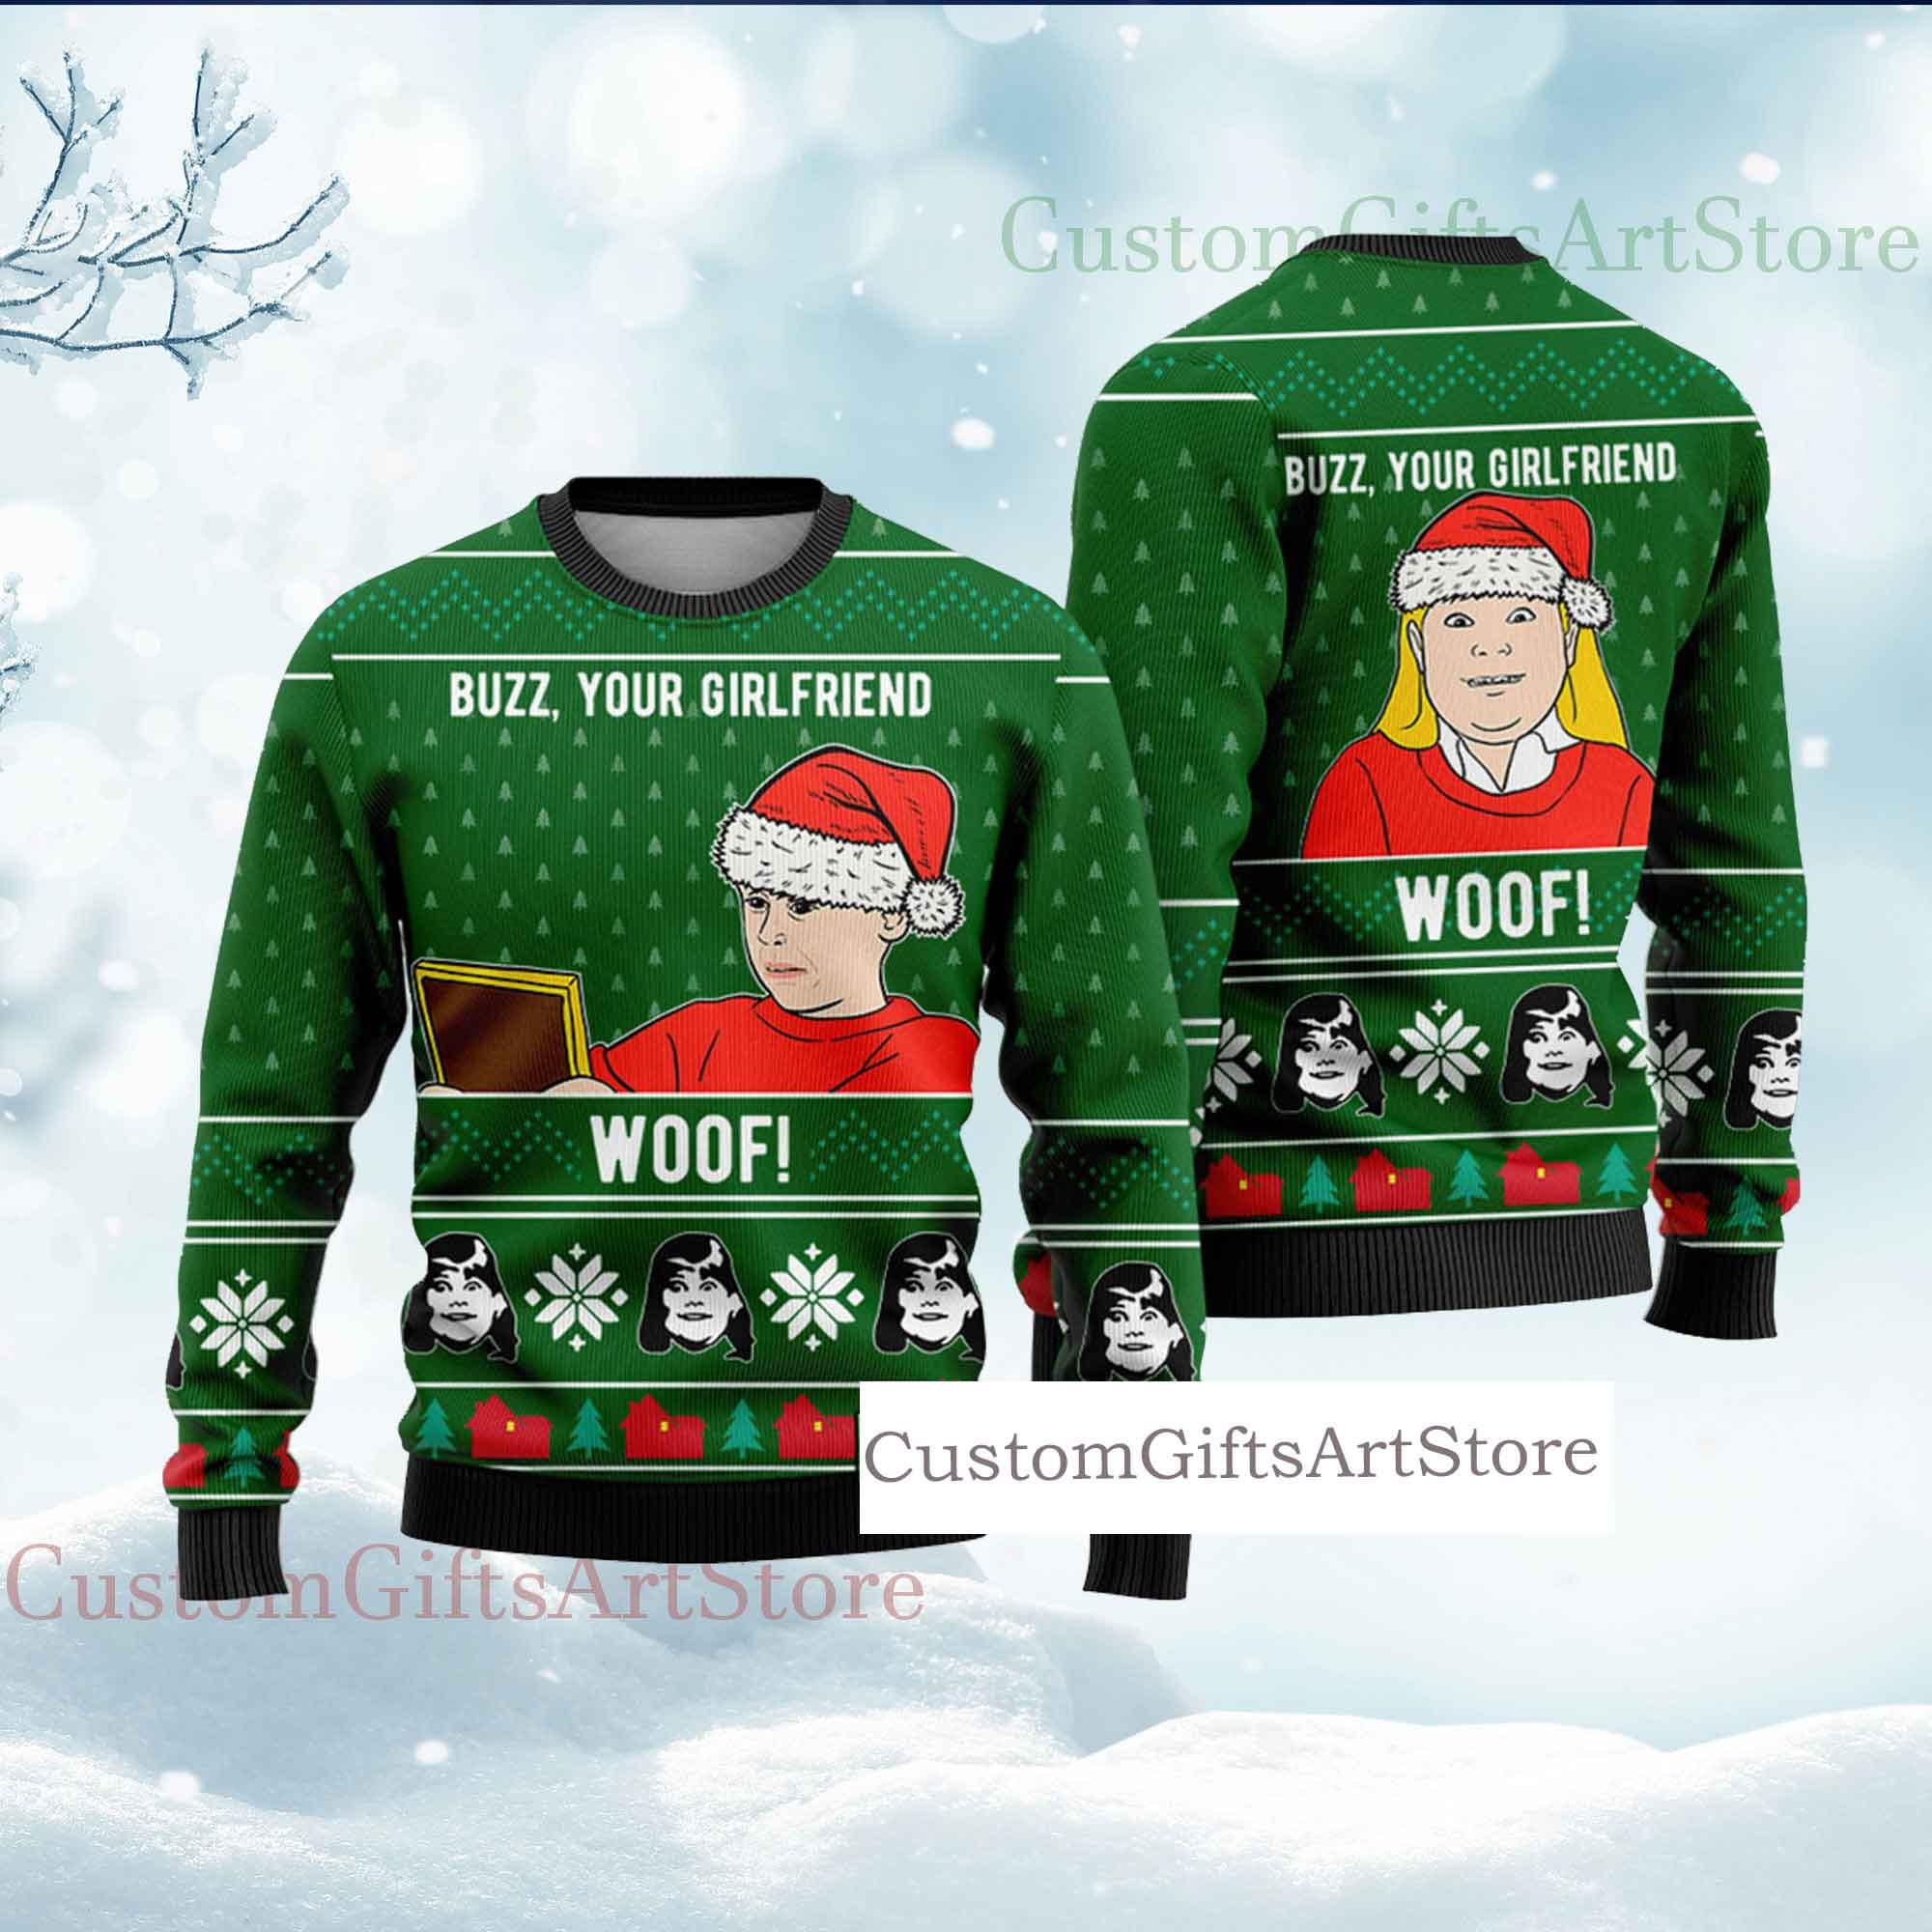 Discover Buzz Your Girlfriend Ugly Sweater 3D, Funny home Kevin Parody xmas movies party gift